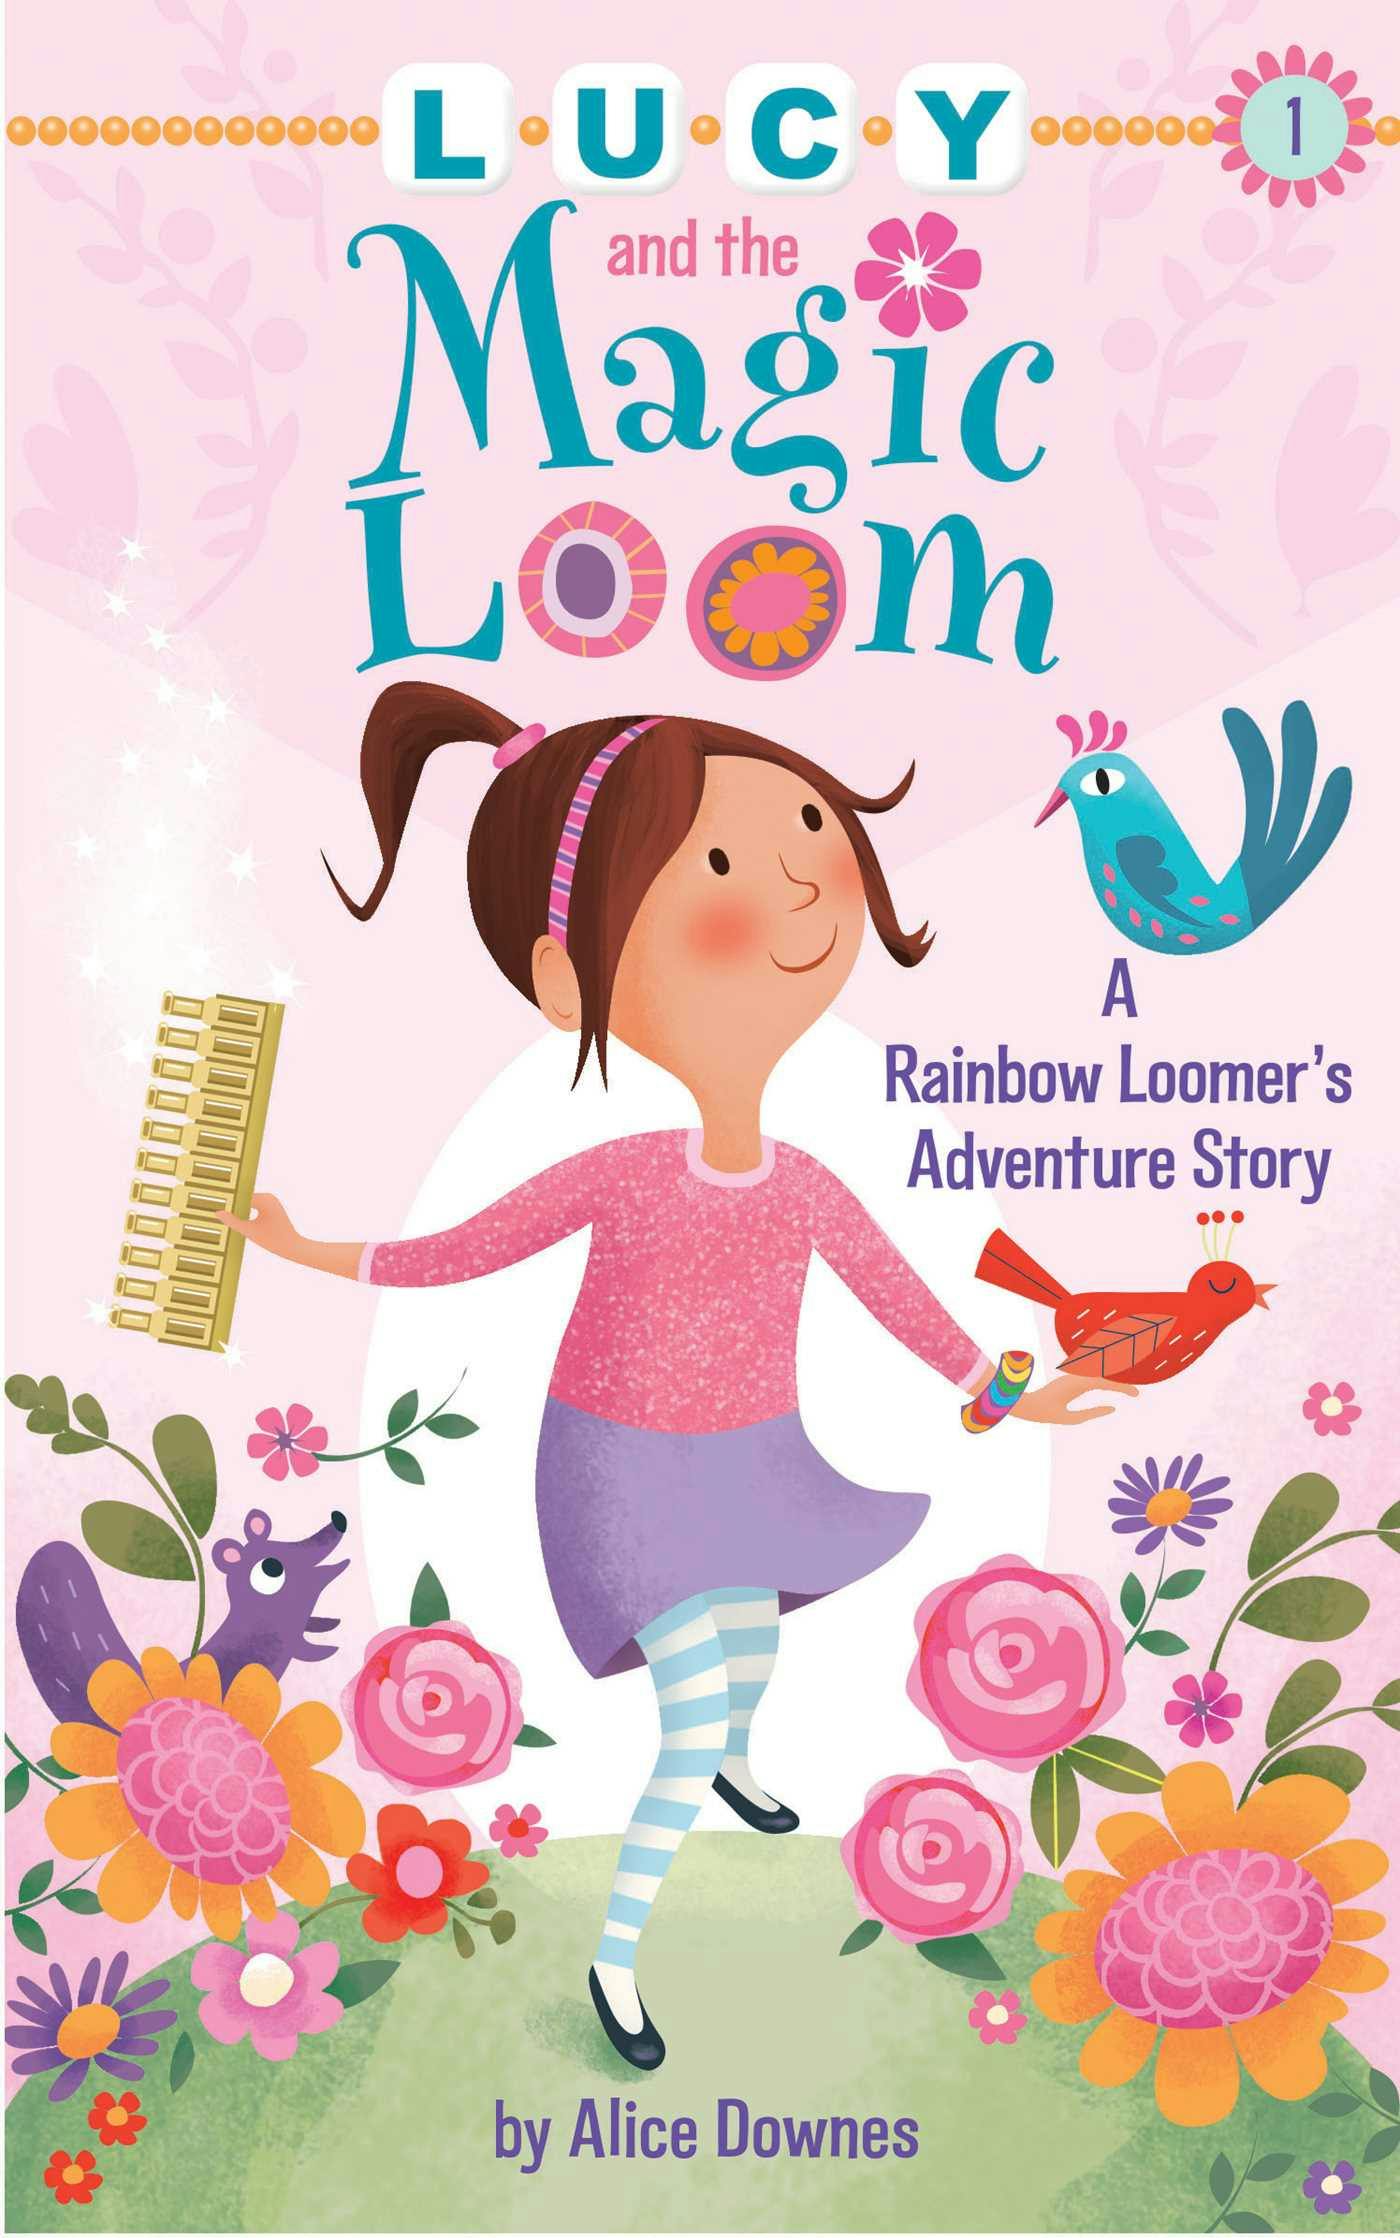 Lucy and the Magic Loom: A Rainbow Loomer's Adventure Story - Alice Downes